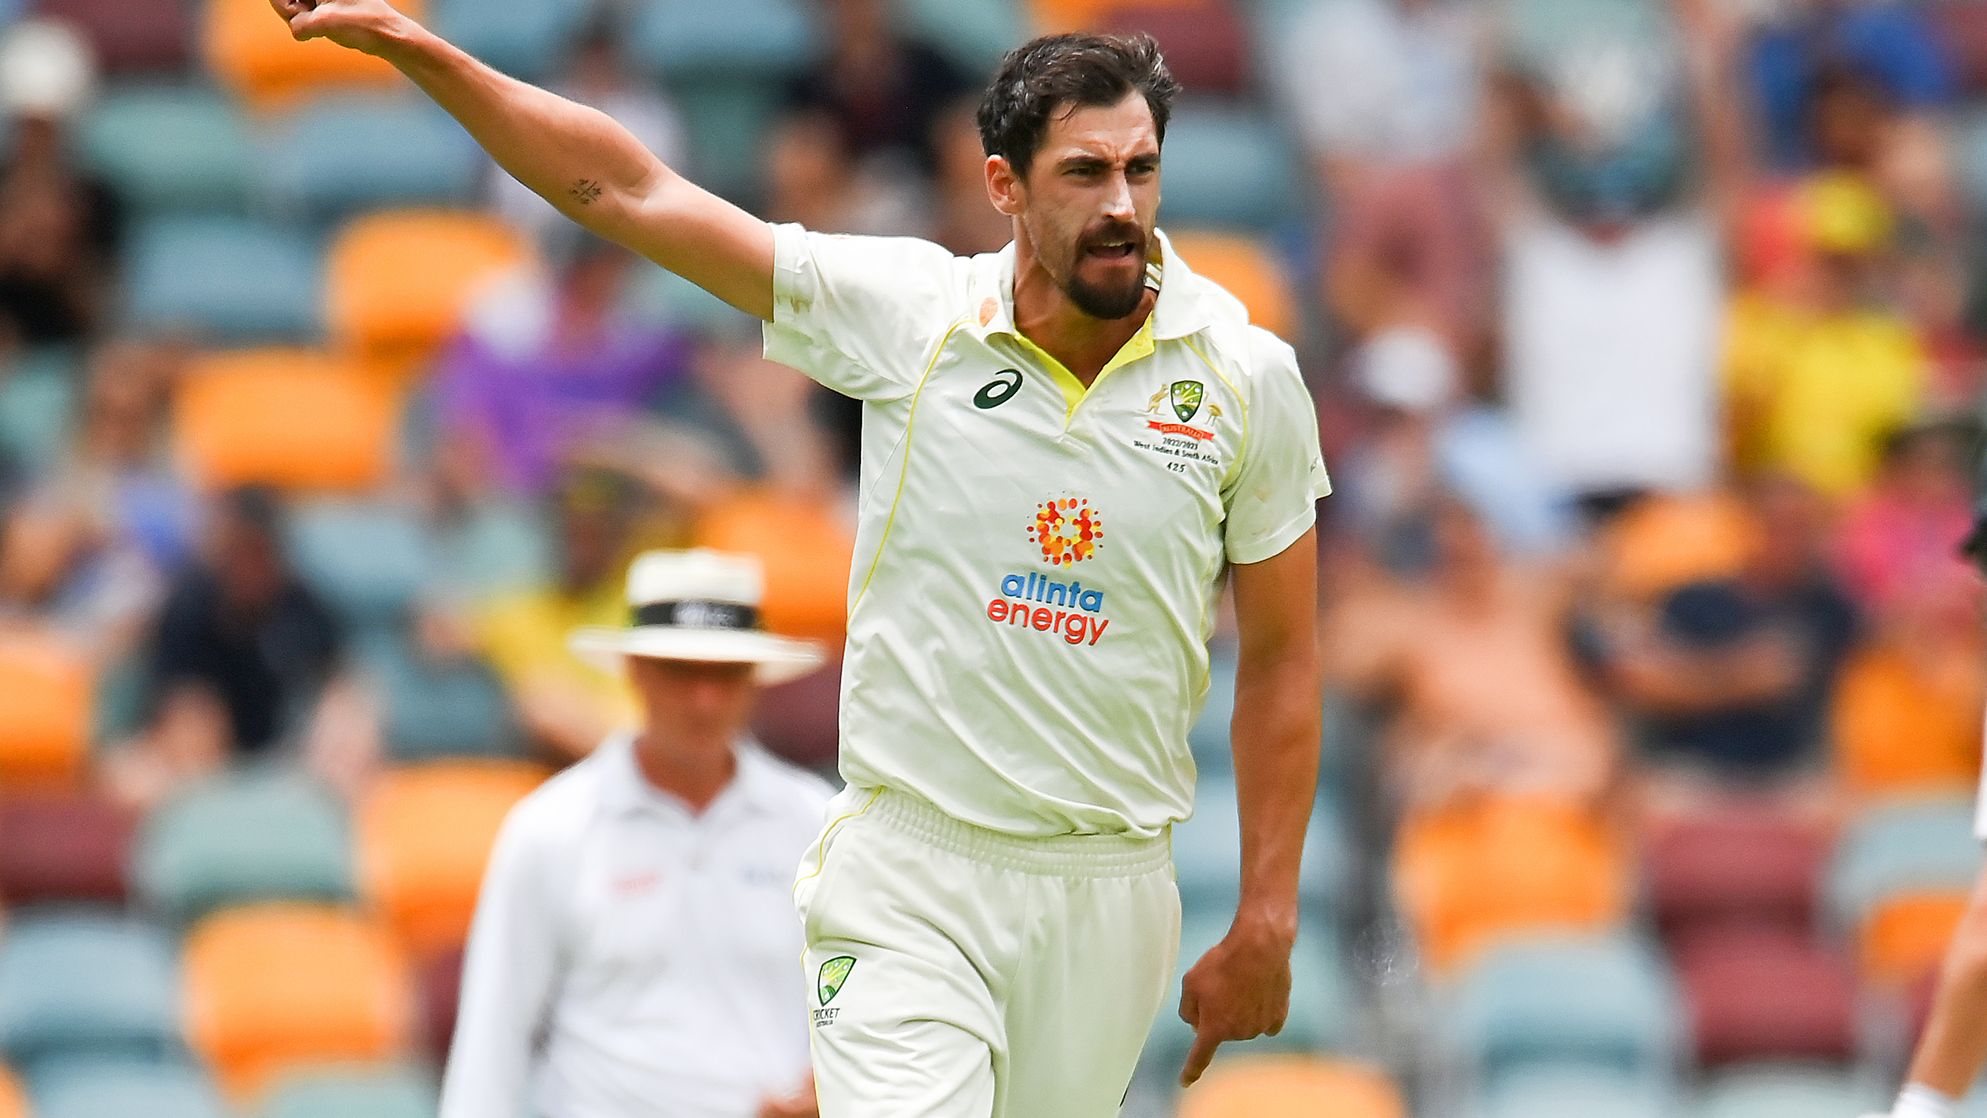 Mitchell Starc of Australia celebrates dismissing Rassie van der Dussen of South Africa and his 300th Test wicket. (Photo by Albert Perez/Getty Images)